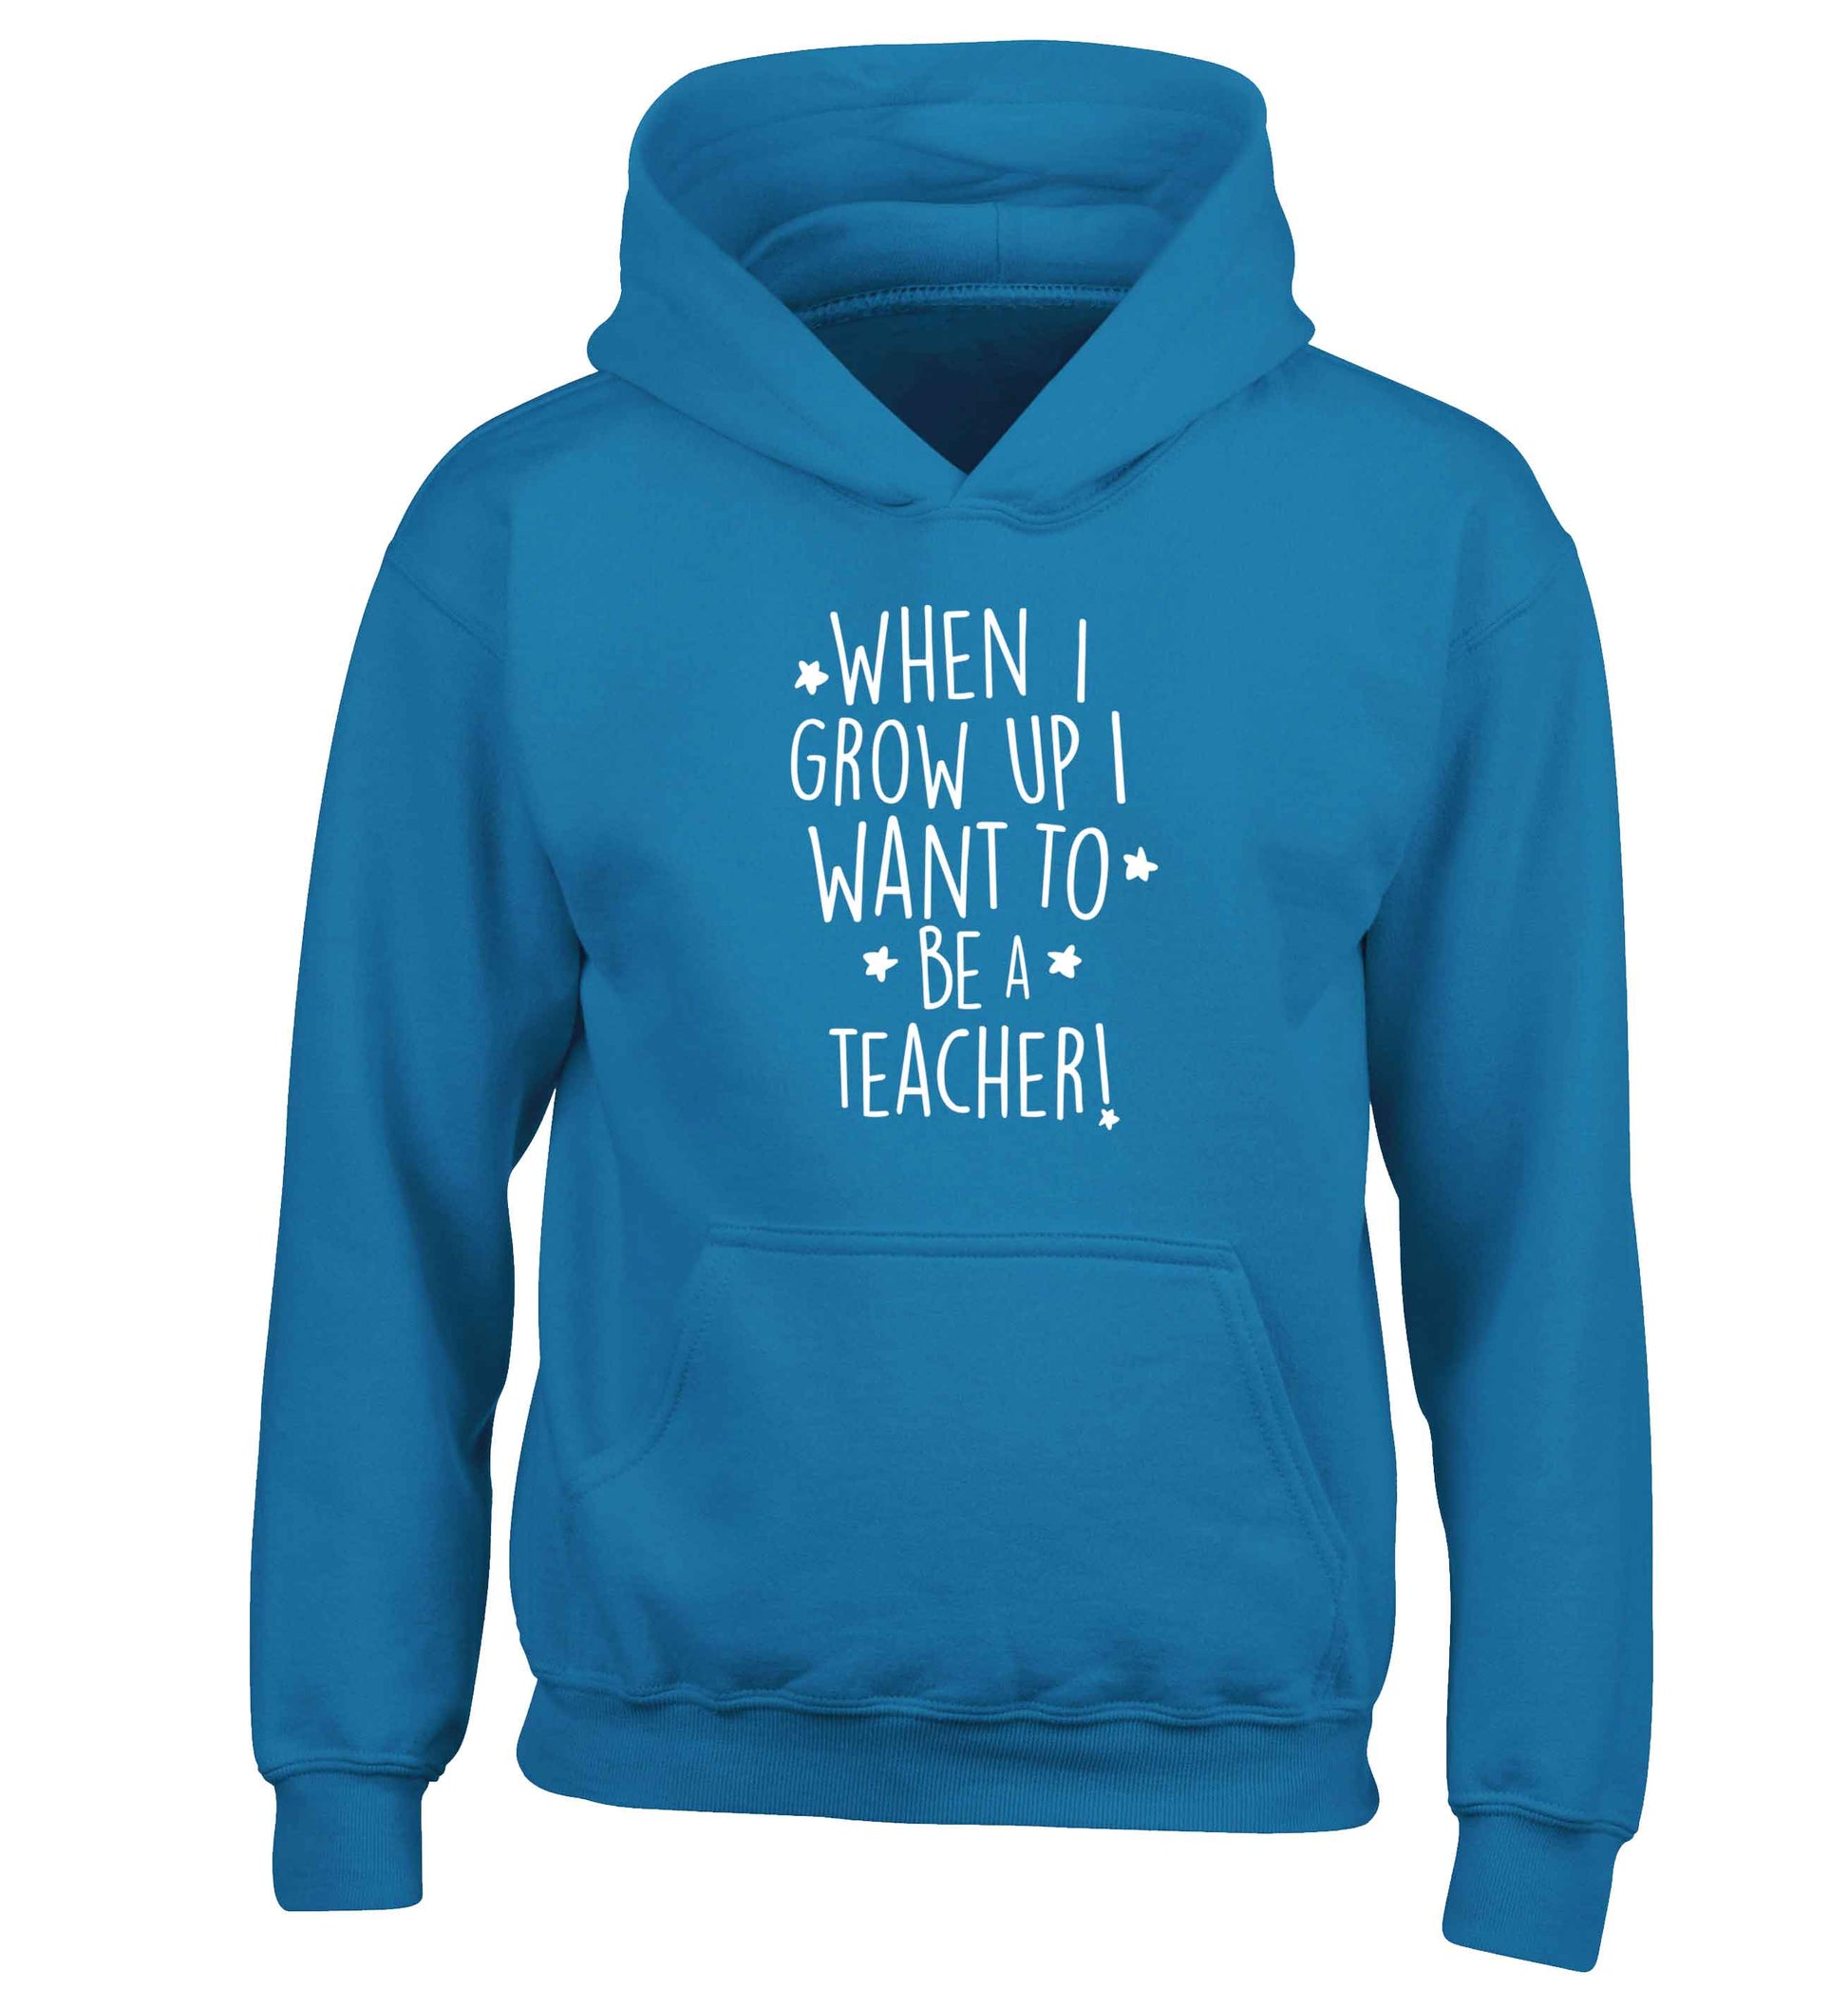 When I grow up I want to be a teacher children's blue hoodie 12-13 Years